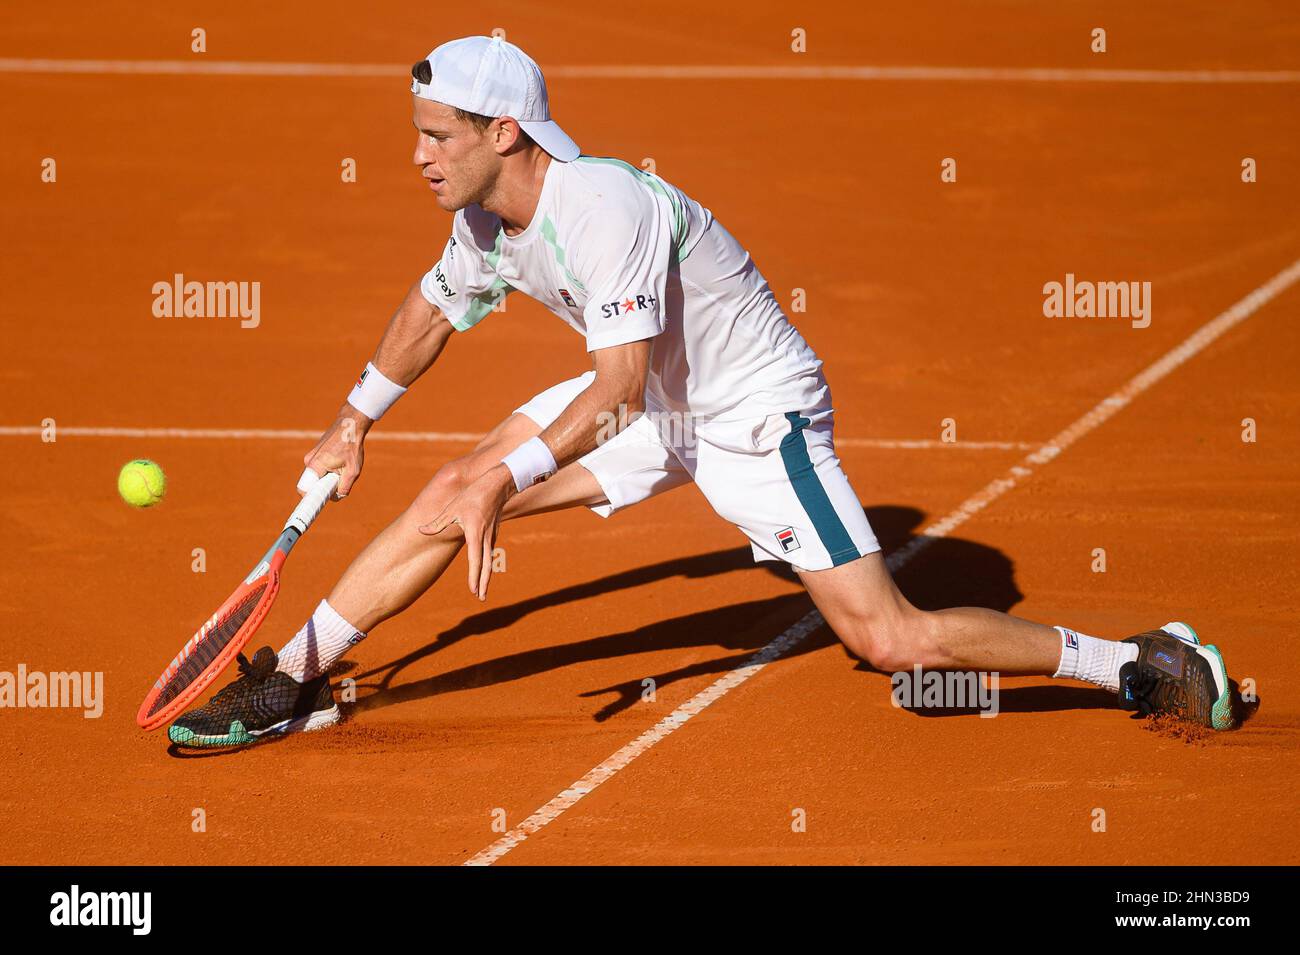 Diego Schwartzman of Argentina hits a backhand during the Mens Singles Final match against Casper Ruud of Norway at Buenos Aires Lawn Tennis Club